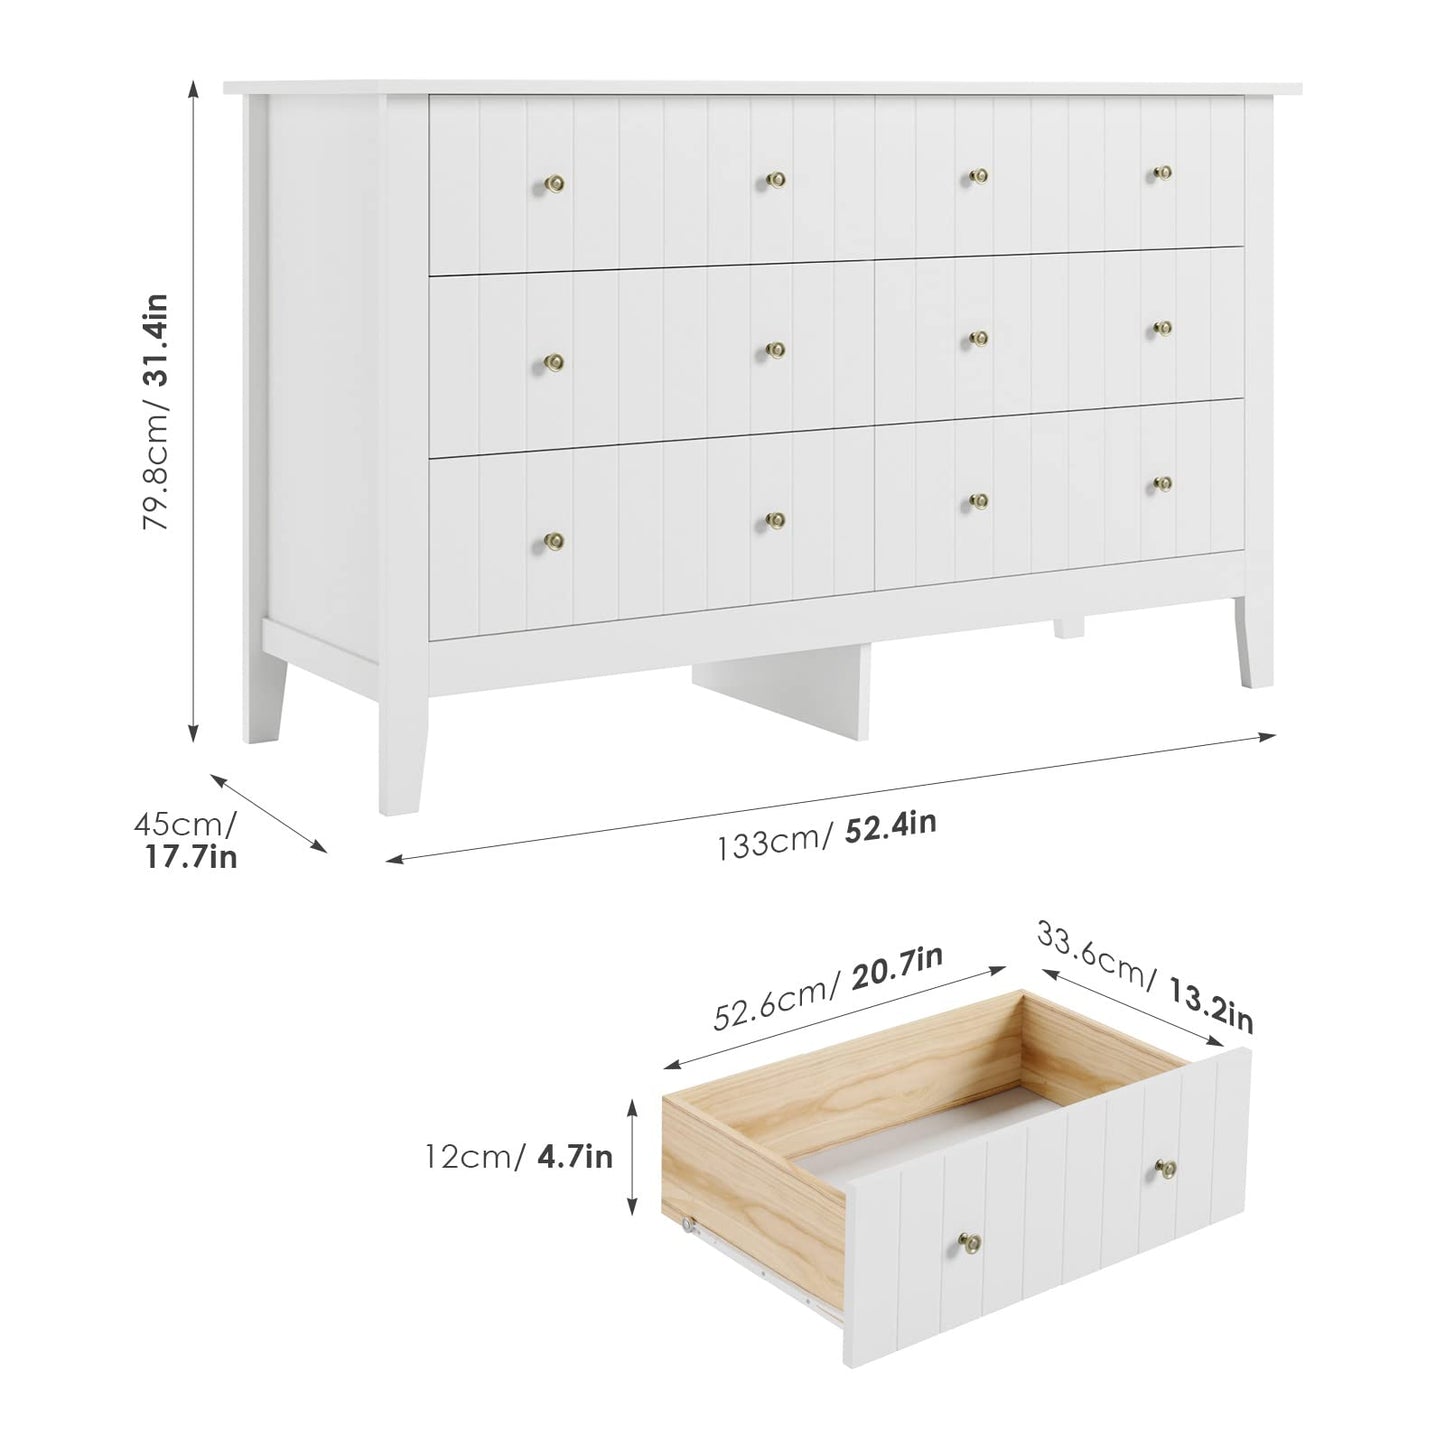 FOTOSOK White Dresser, Chest of Drawers, Modern 6 Drawer Double Dresser with Deep Drawers, Wide Storage Organizer Cabinet for Living Room, Hallway